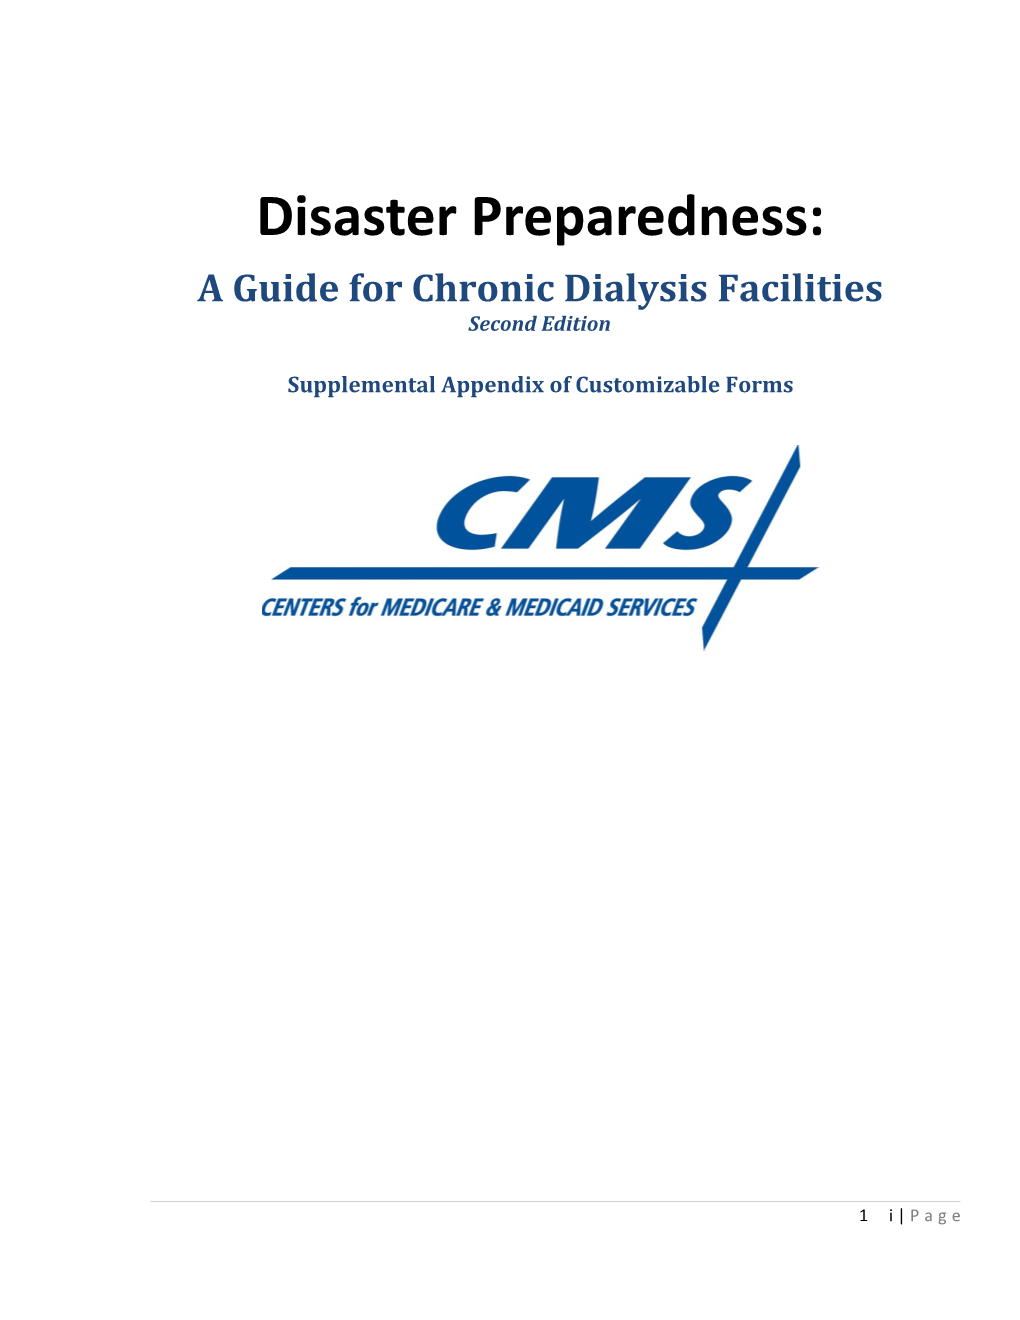 Disaster Preparedness - A Guide For Chronic Dialysis Faciliteis